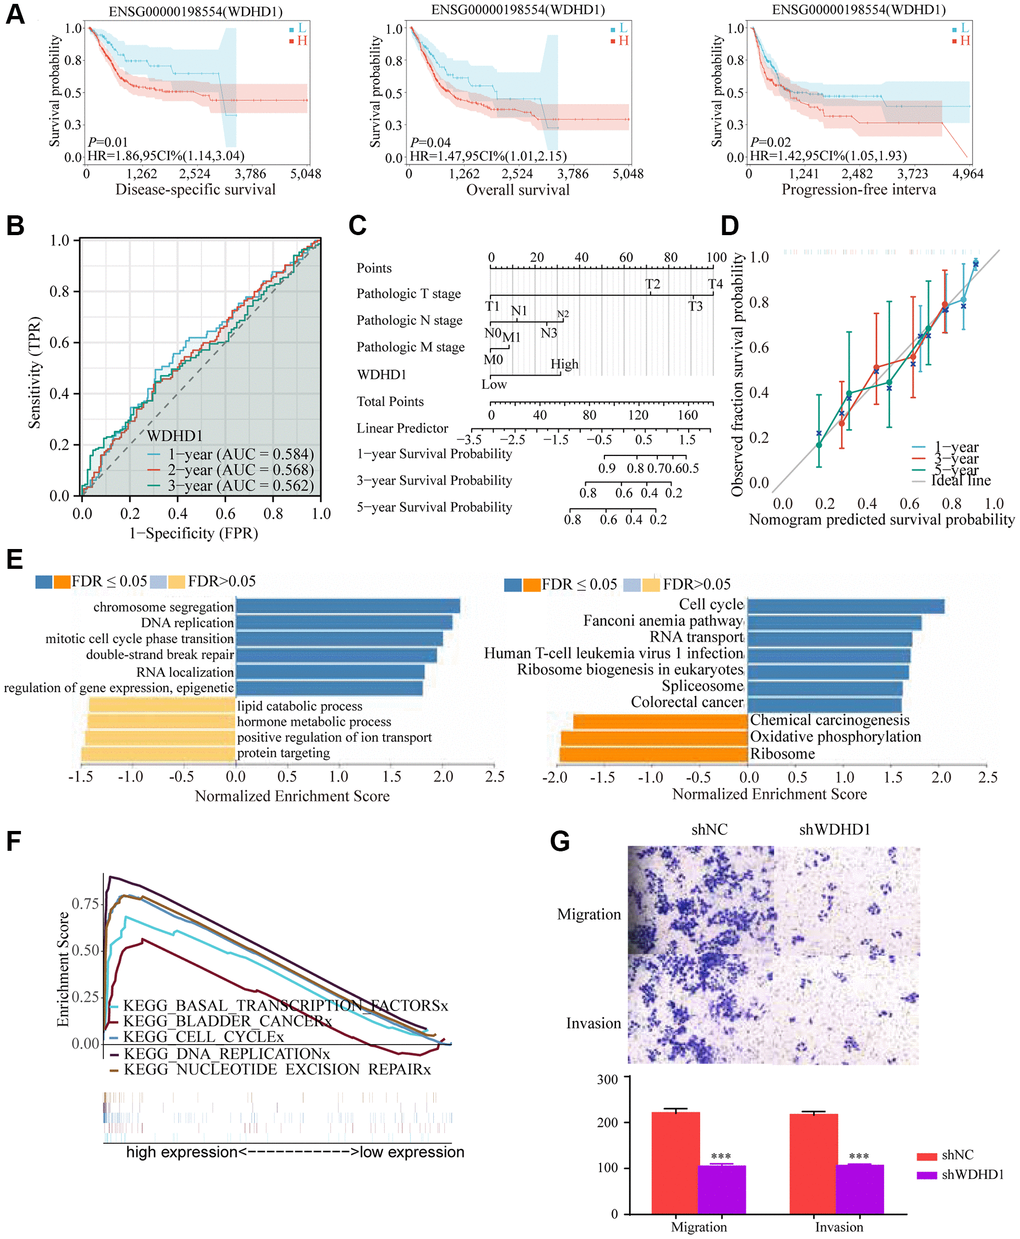 Prognostic value and functional analysis of WDHD1 in BLCA. (A) Prognostic modeling assays. (B) Time-dependent ROC analysis curves for 1-, 3-, and 5-year OS characteristics of WDHD1 (C, D) Nomogram and ROC curves for predicting the 1-, 3-, and 5-year OS of BLCA patients in the entire cohort. (E) GO and KEGG of WDHD1. (F) GSEA analysis of the correlation between DEGs of WDHD1 and function pathways. (G) Invasion and migration assay, knockdown of WDHD1 expression reduces invasion and migration ability.